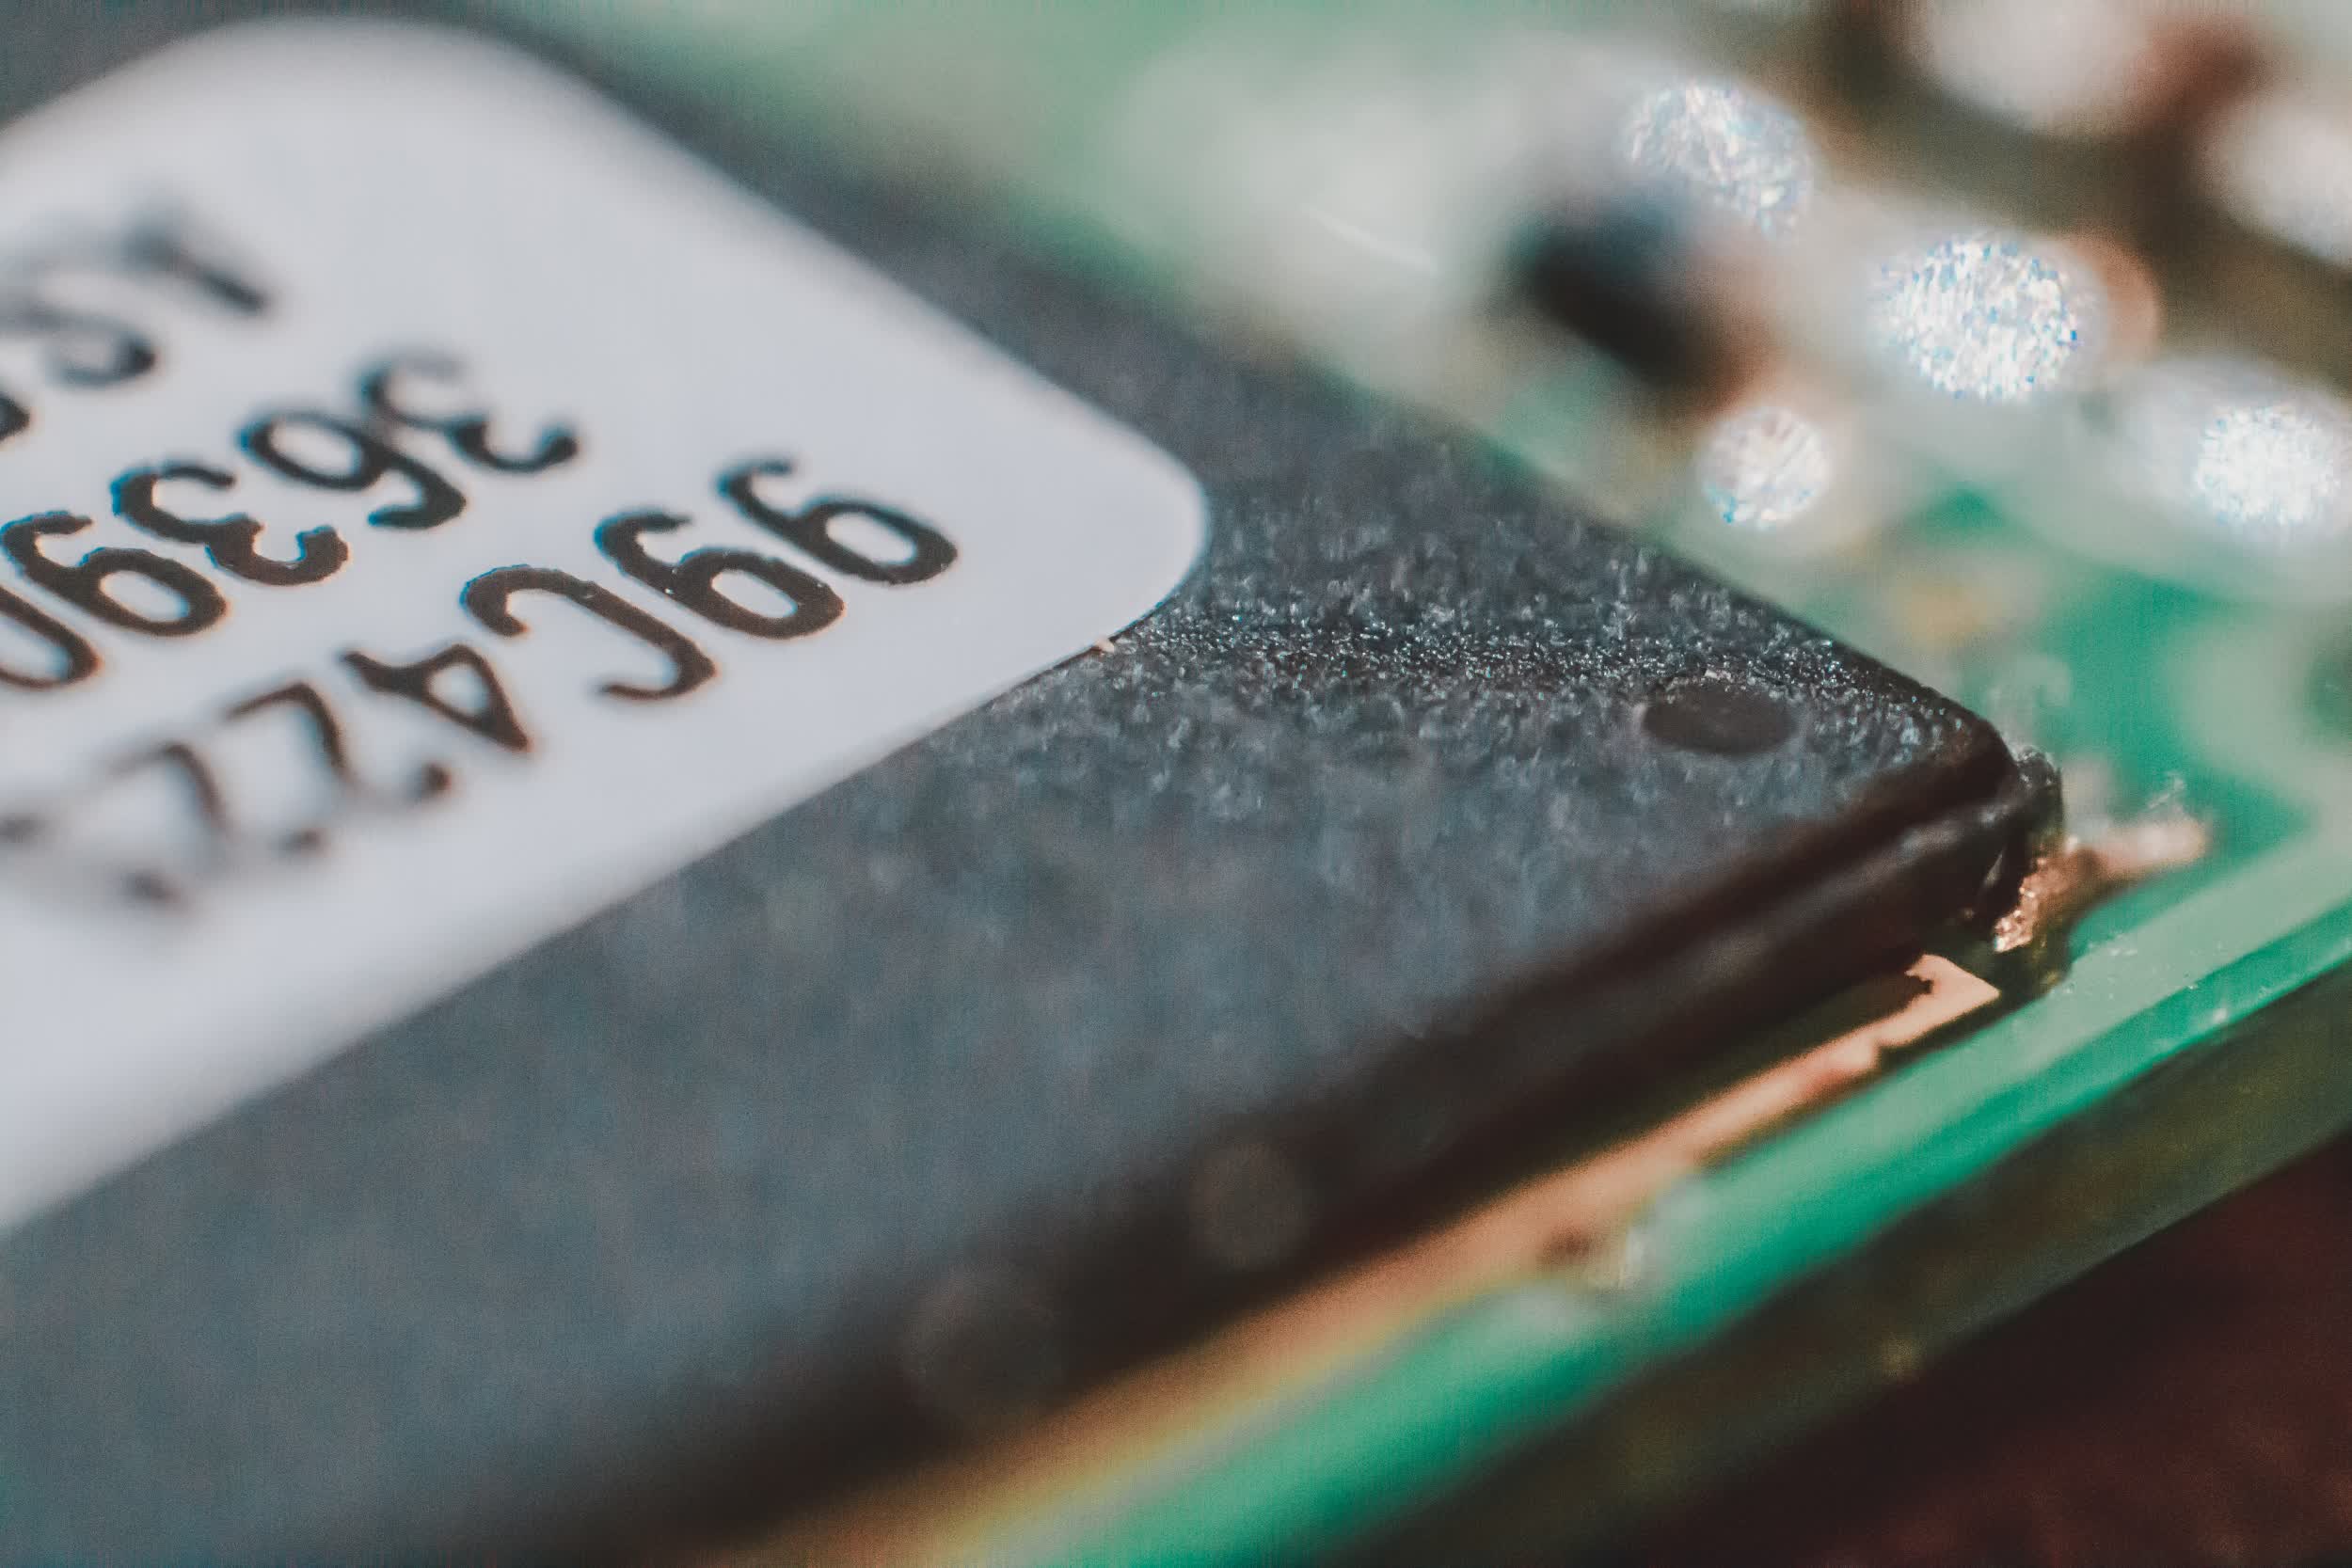 SSDs are about to get a lot cheaper as NAND prices plummet